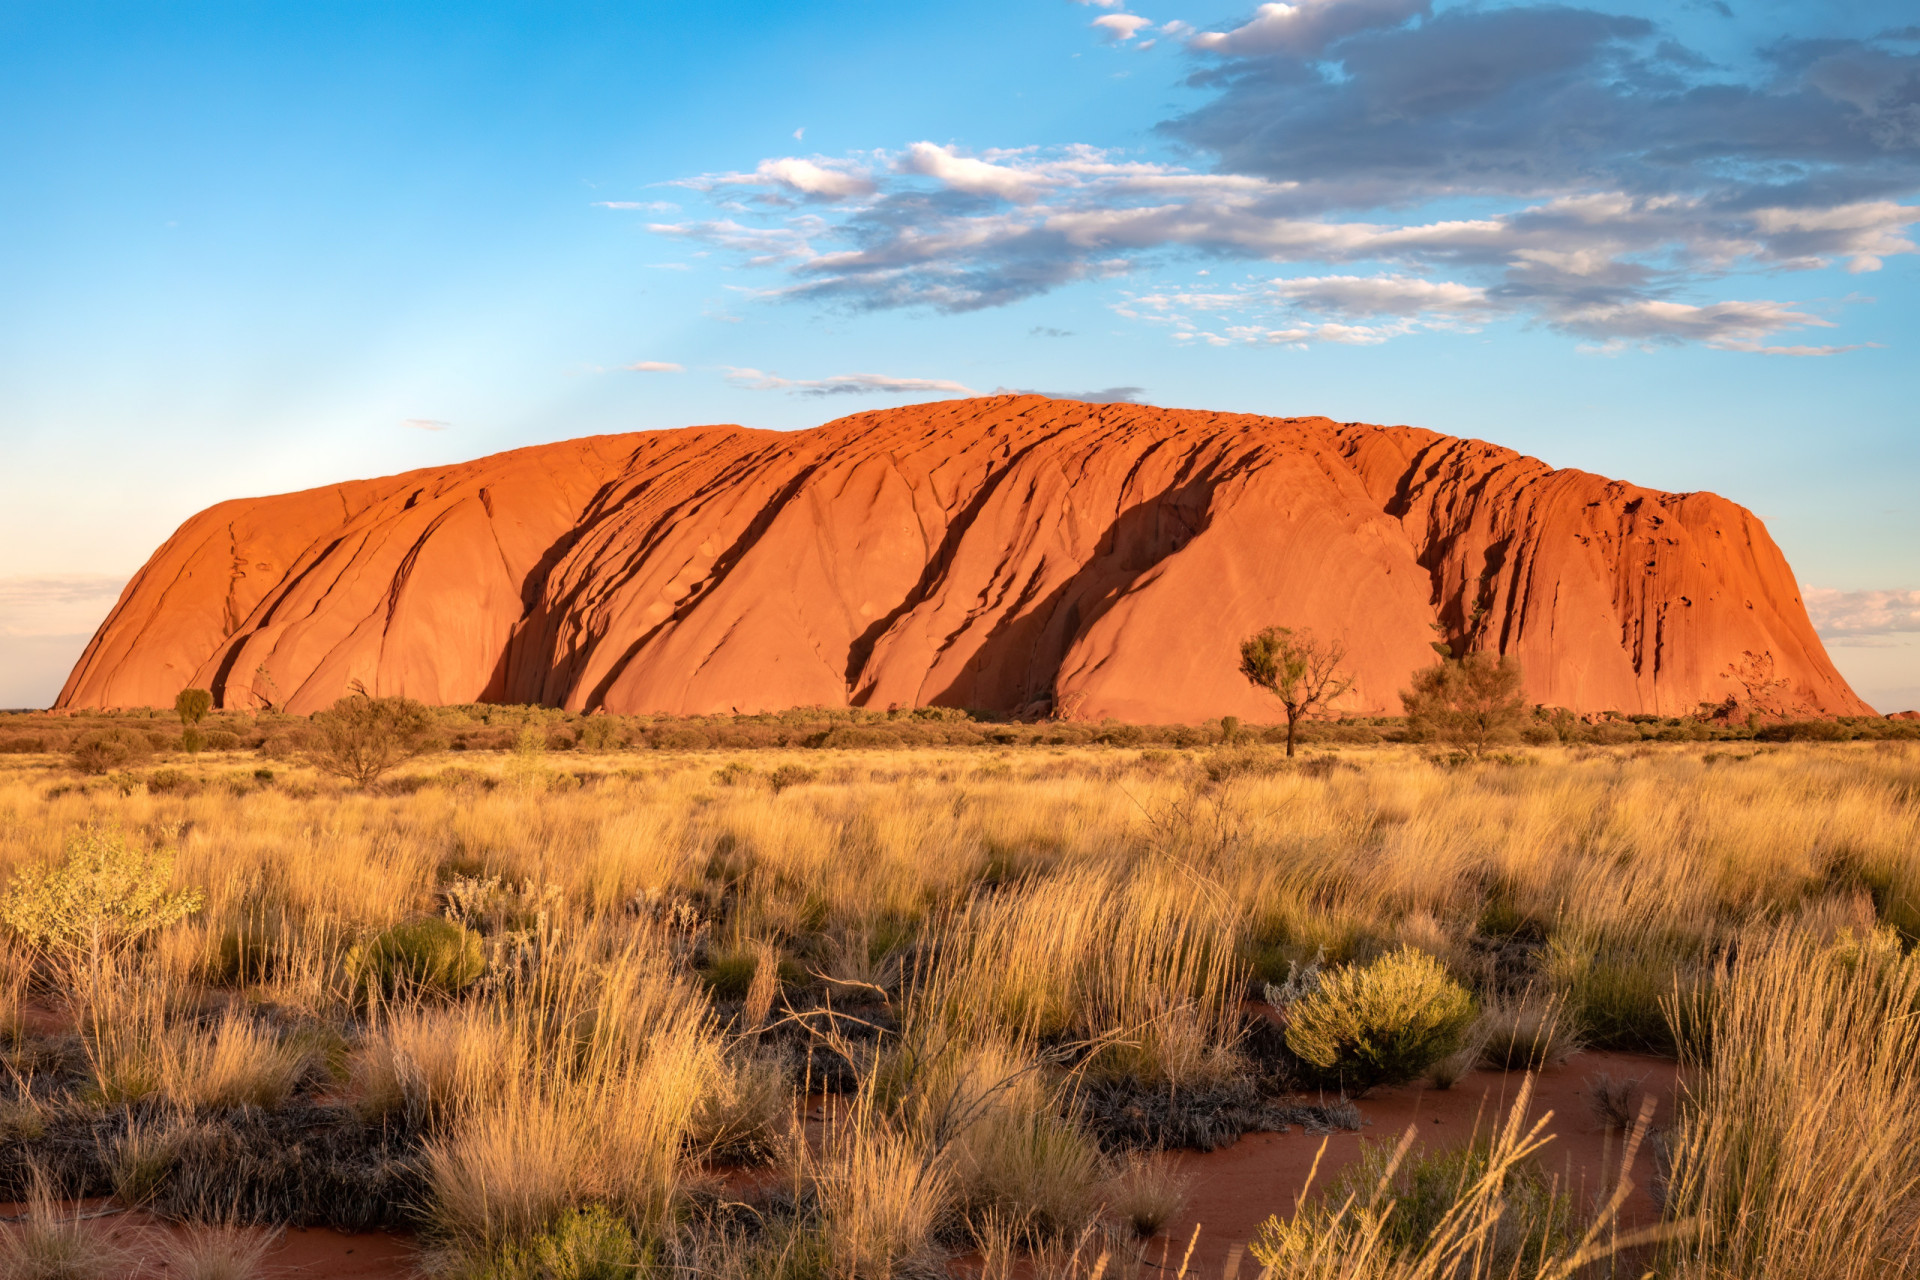 <p>Sacred sites, like Uluru, are usually parts of the natural landscape that have a special meaning or significance in Aboriginal tradition.</p><p><a href="https://www.msn.com/en-us/community/channel/vid-7xx8mnucu55yw63we9va2gwr7uihbxwc68fxqp25x6tg4ftibpra?cvid=94631541bc0f4f89bfd59158d696ad7e">Follow us and access great exclusive content every day</a></p>